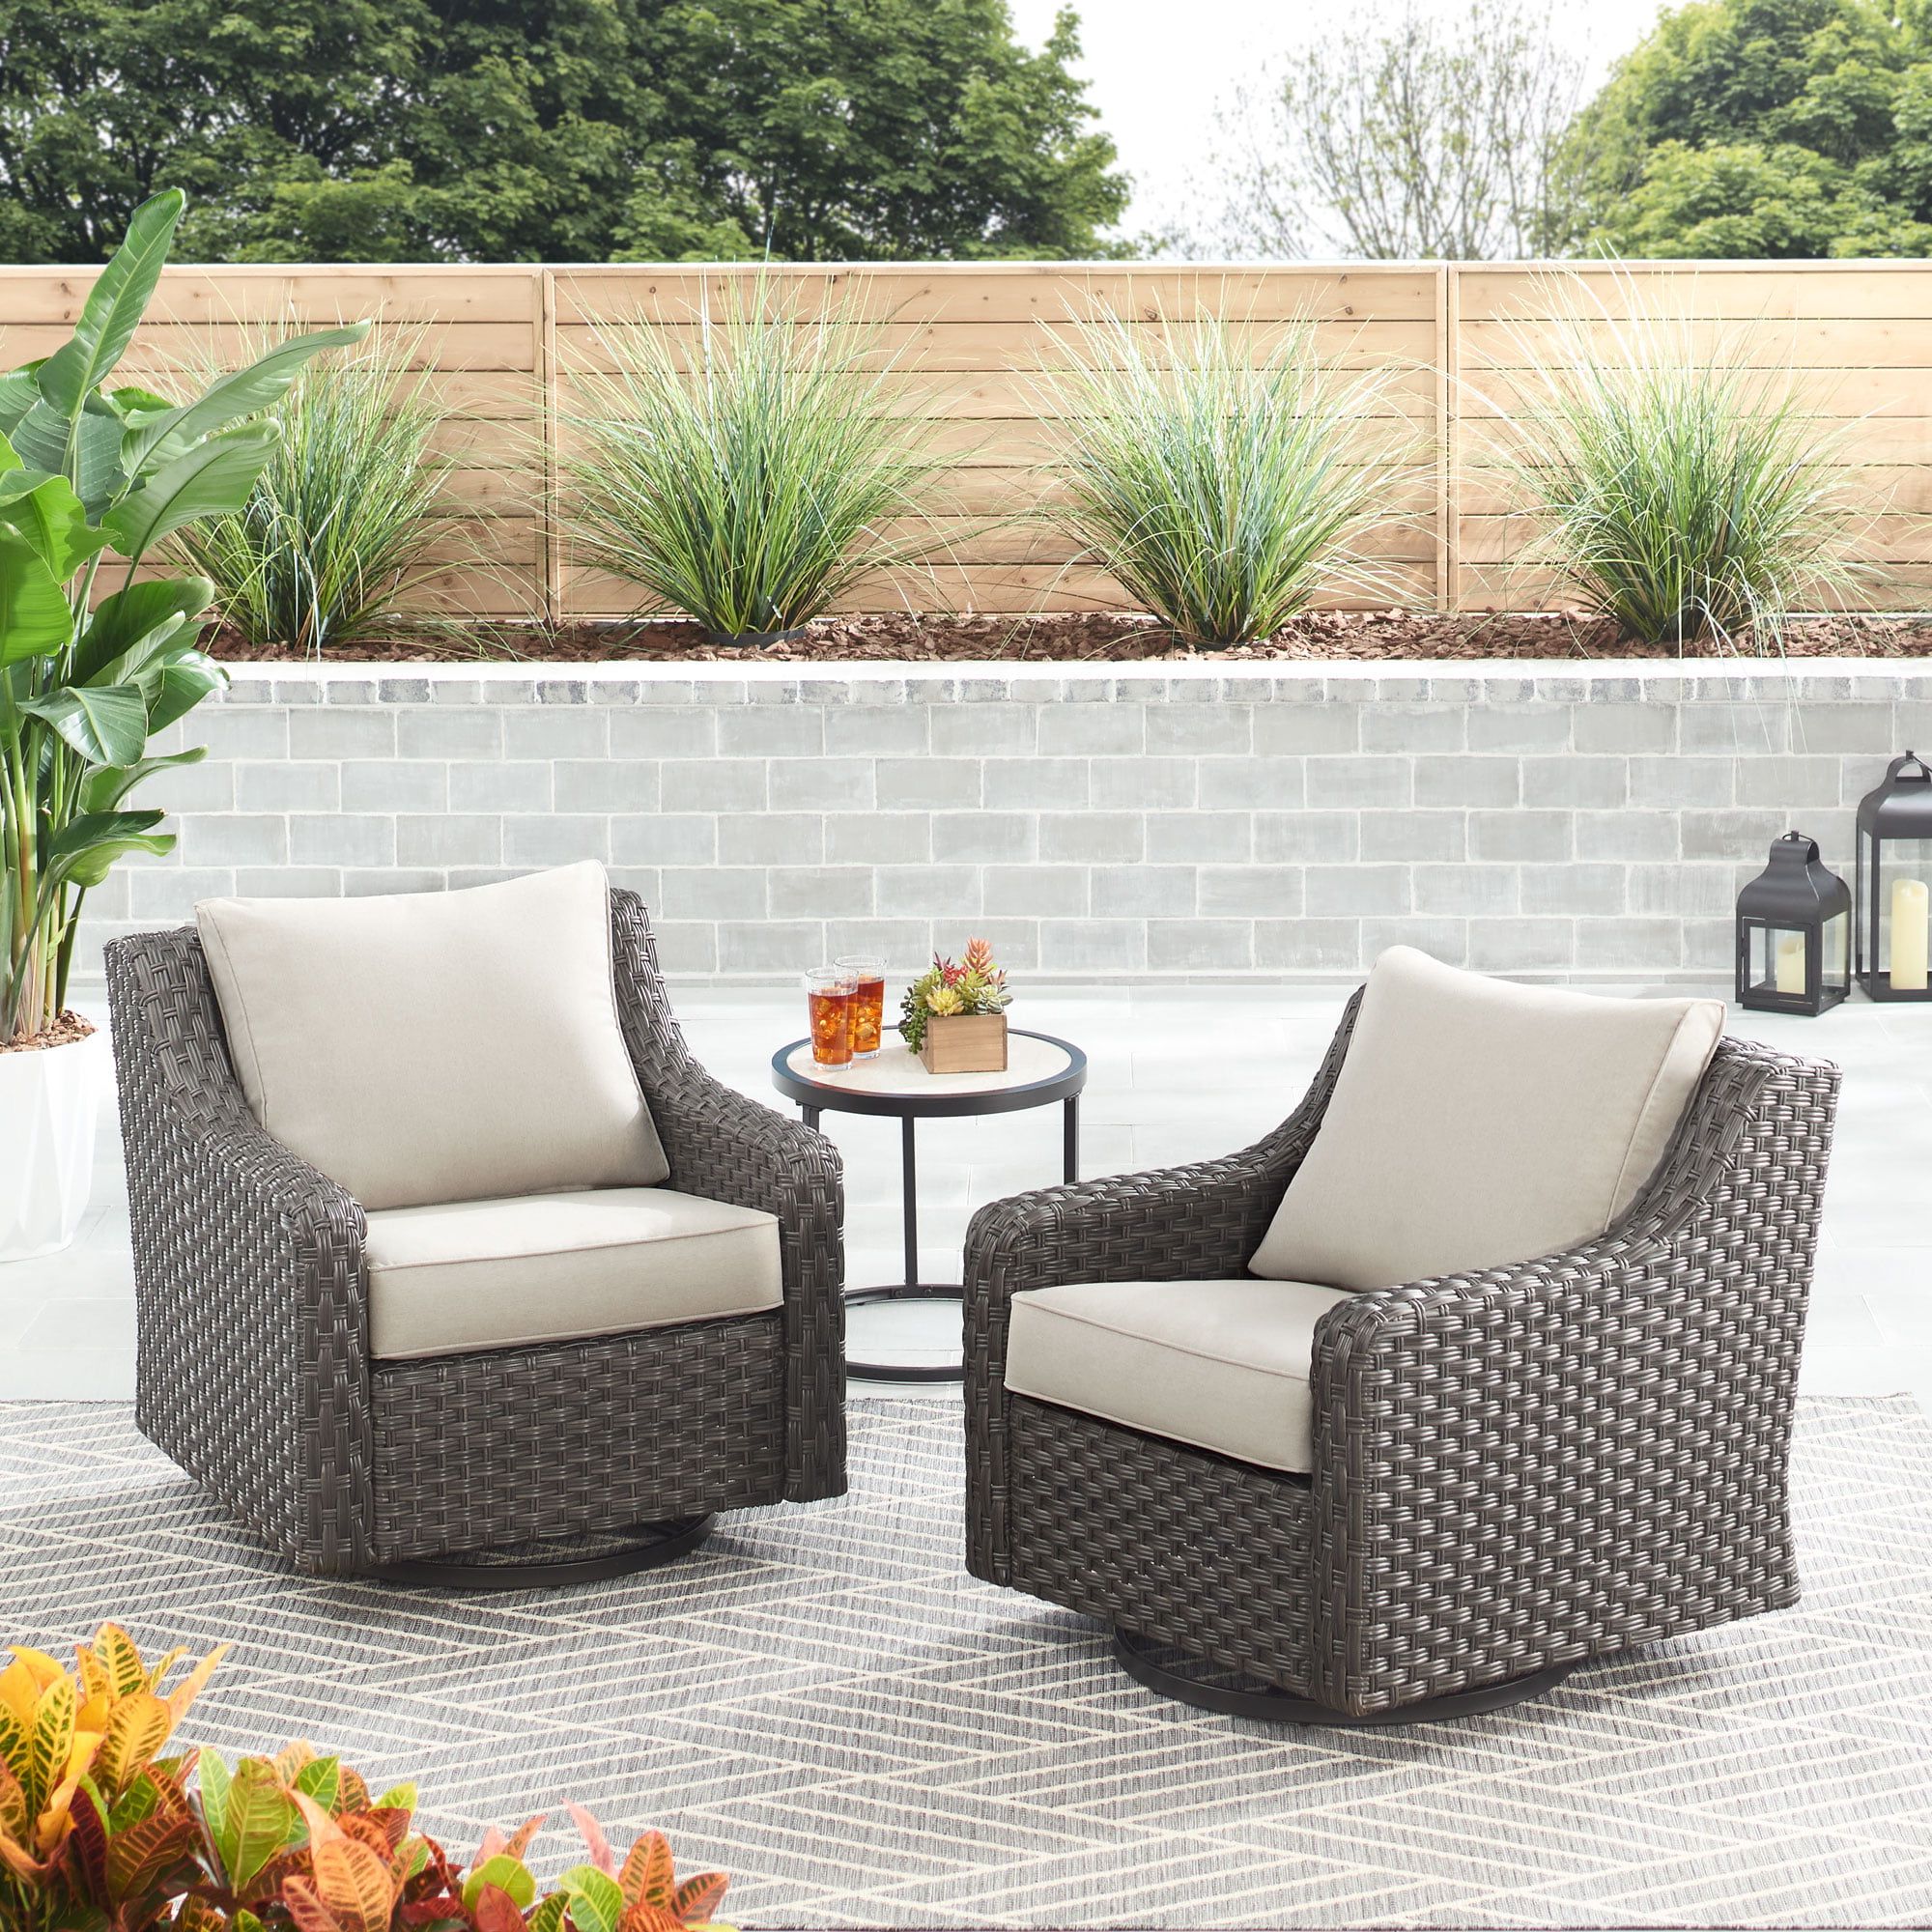 2 Piece Swivel Gliders With Patio Cover Regarding Trendy Better Homes & Gardens River Oaks 2 Piece Wicker Swivel Glider With Patio  Covers, Dark – Walmart (Photo 3 of 15)